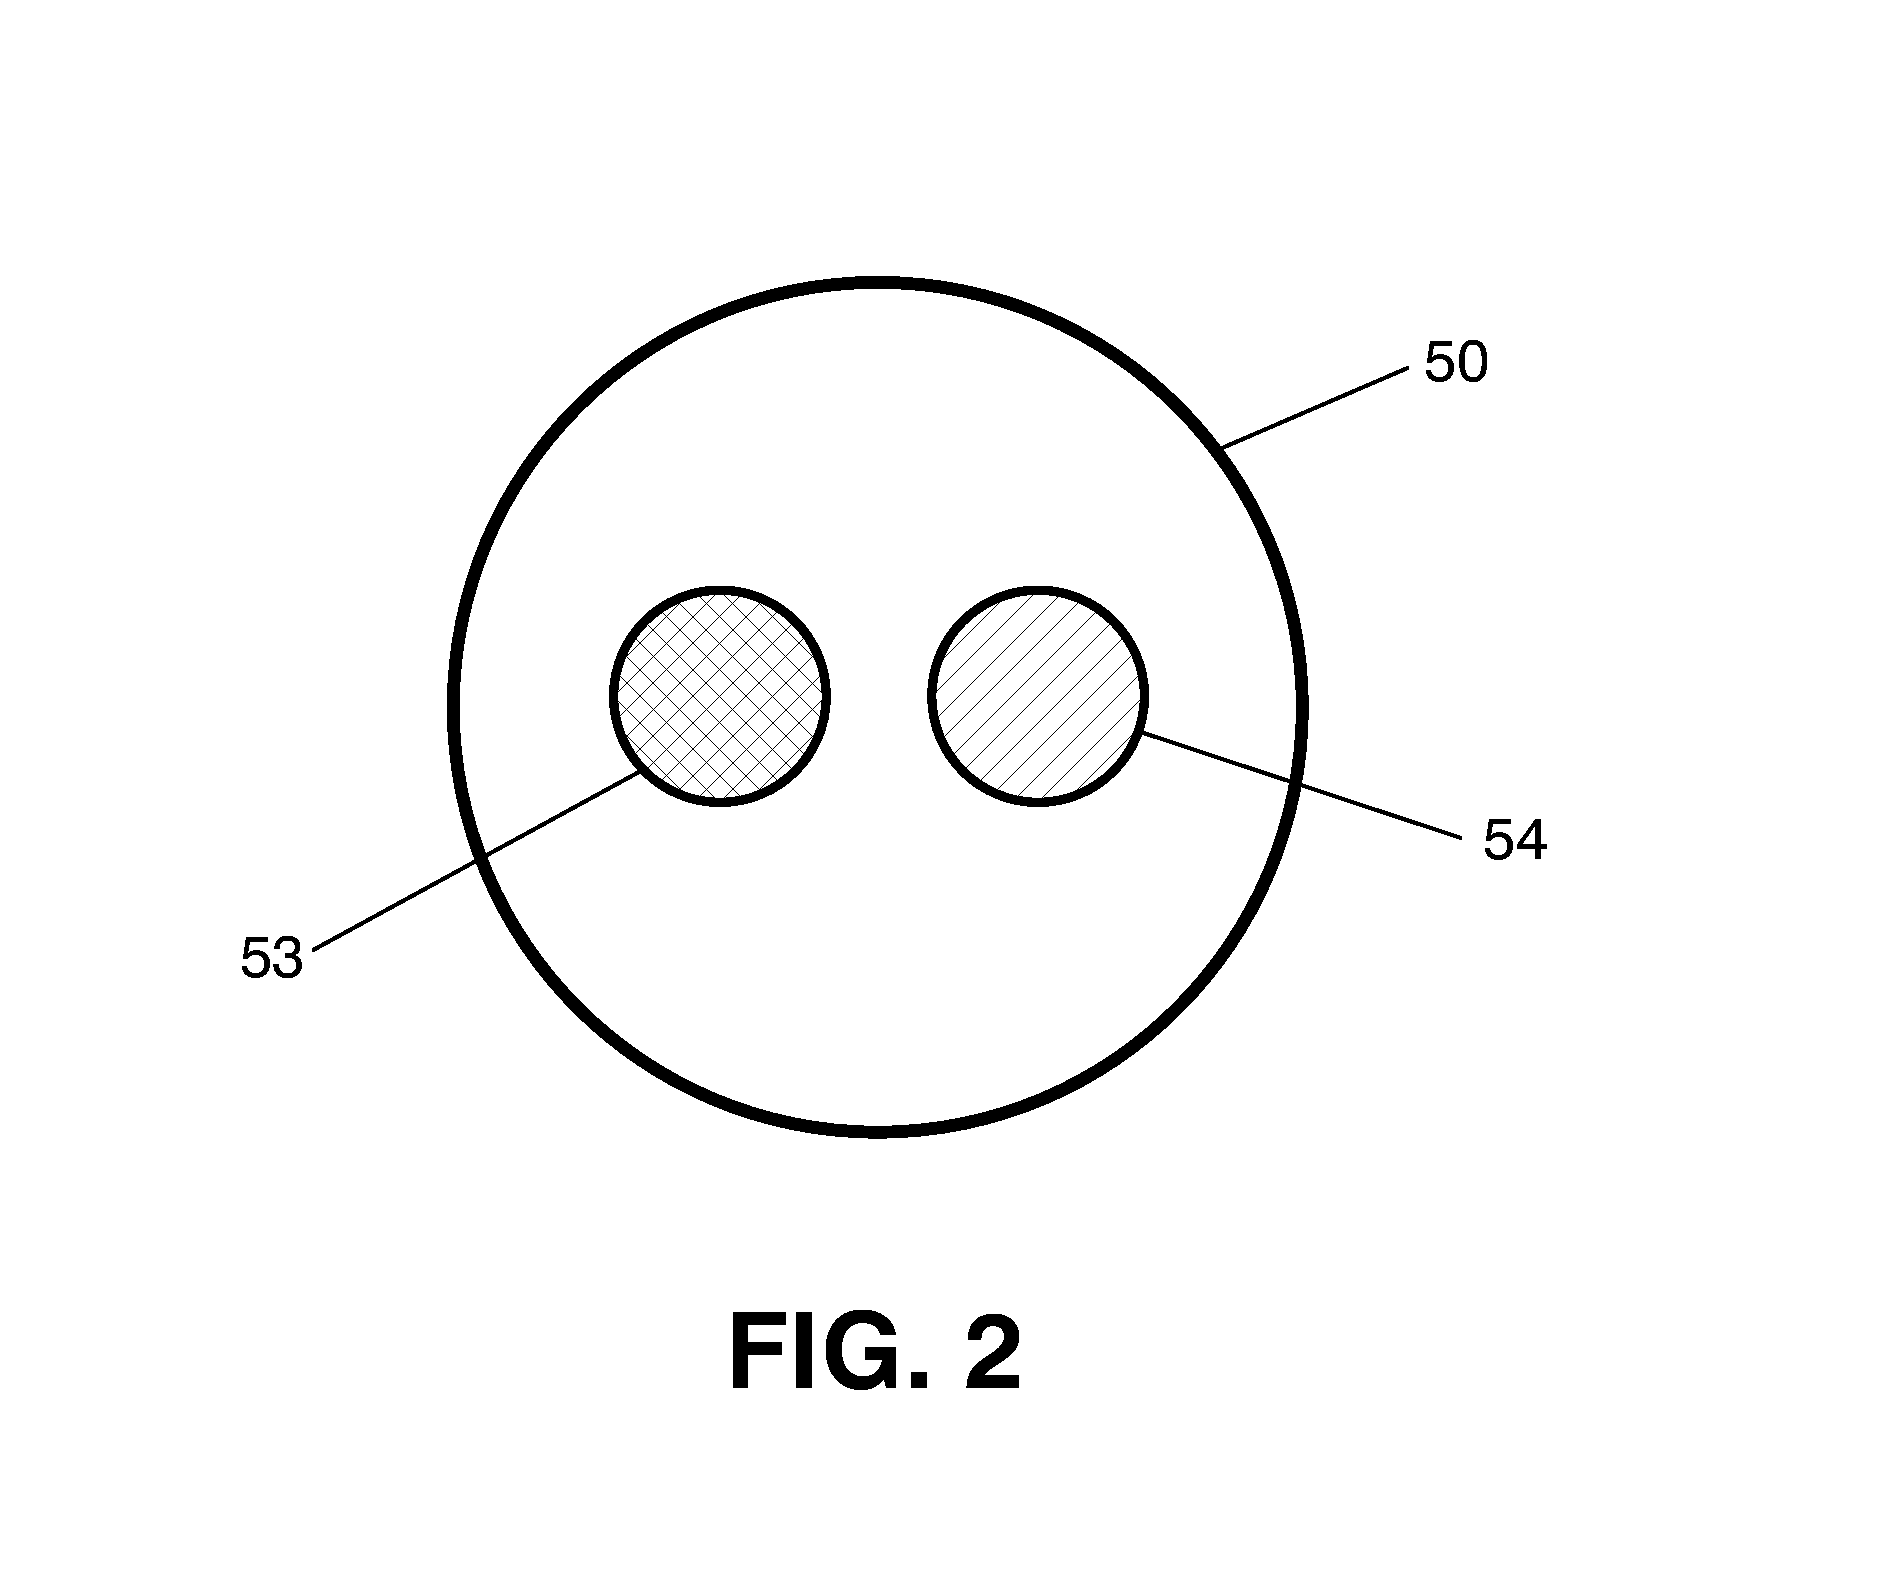 Device for polymerizing lactams in molds